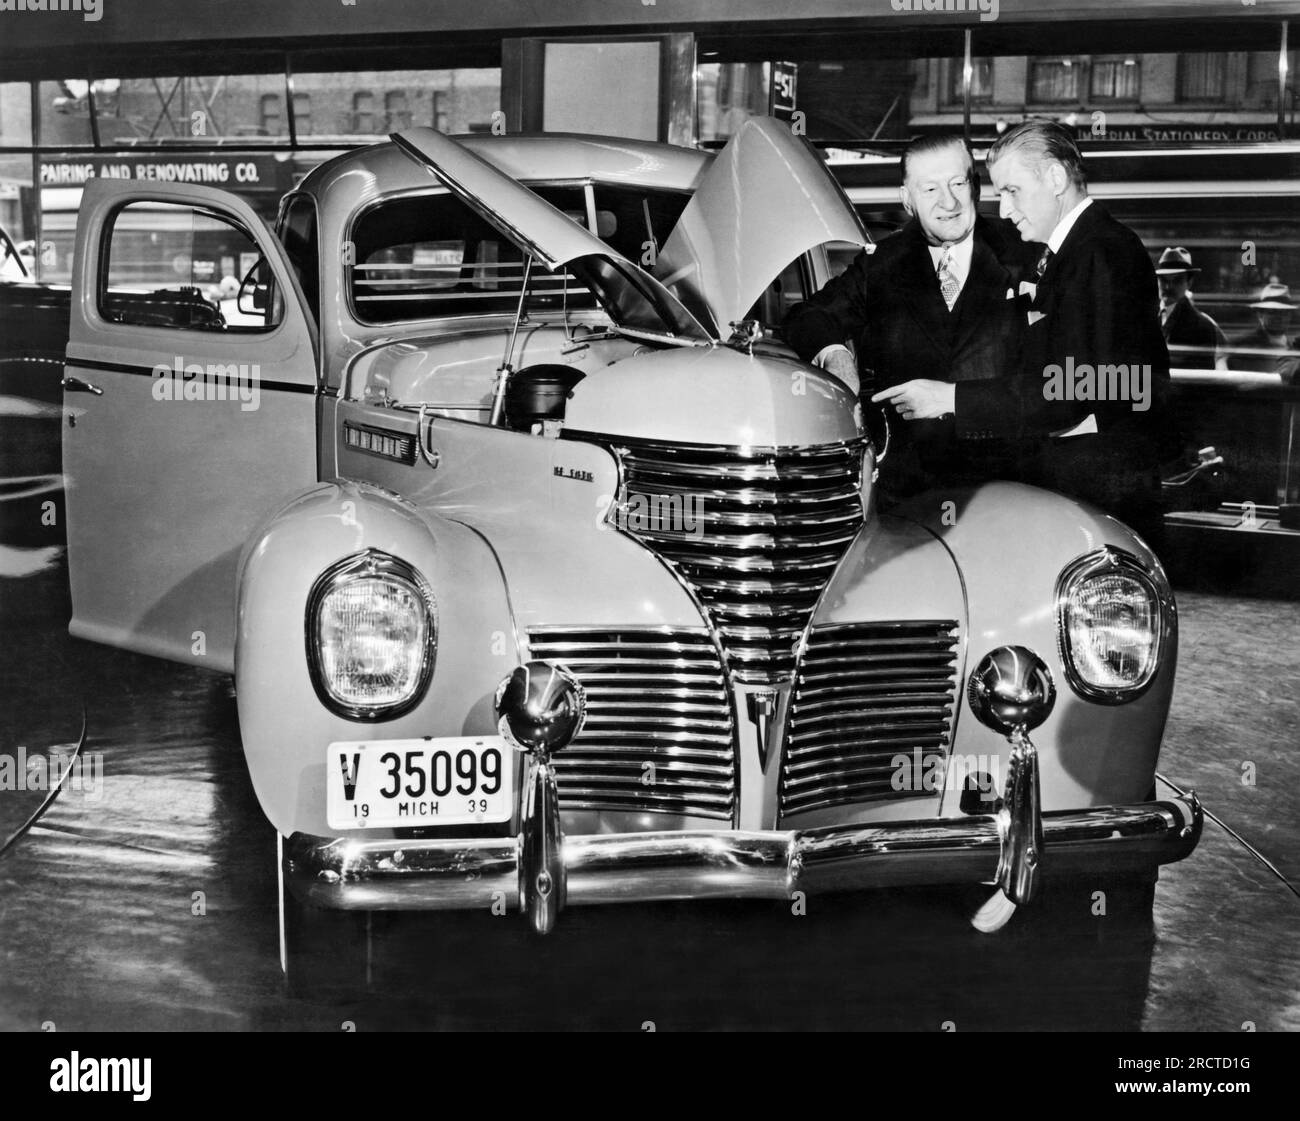 New York, New York:  March, 1939 Chrysler De Soto executives preview the new 'Talking De Soto' in the International Salon of the Chrysler Building in NY. The specially engineered car does everything from blow its horn to stop and start its engine, all by itself with no one in the car. It is going on a nation-wide tour. Stock Photo